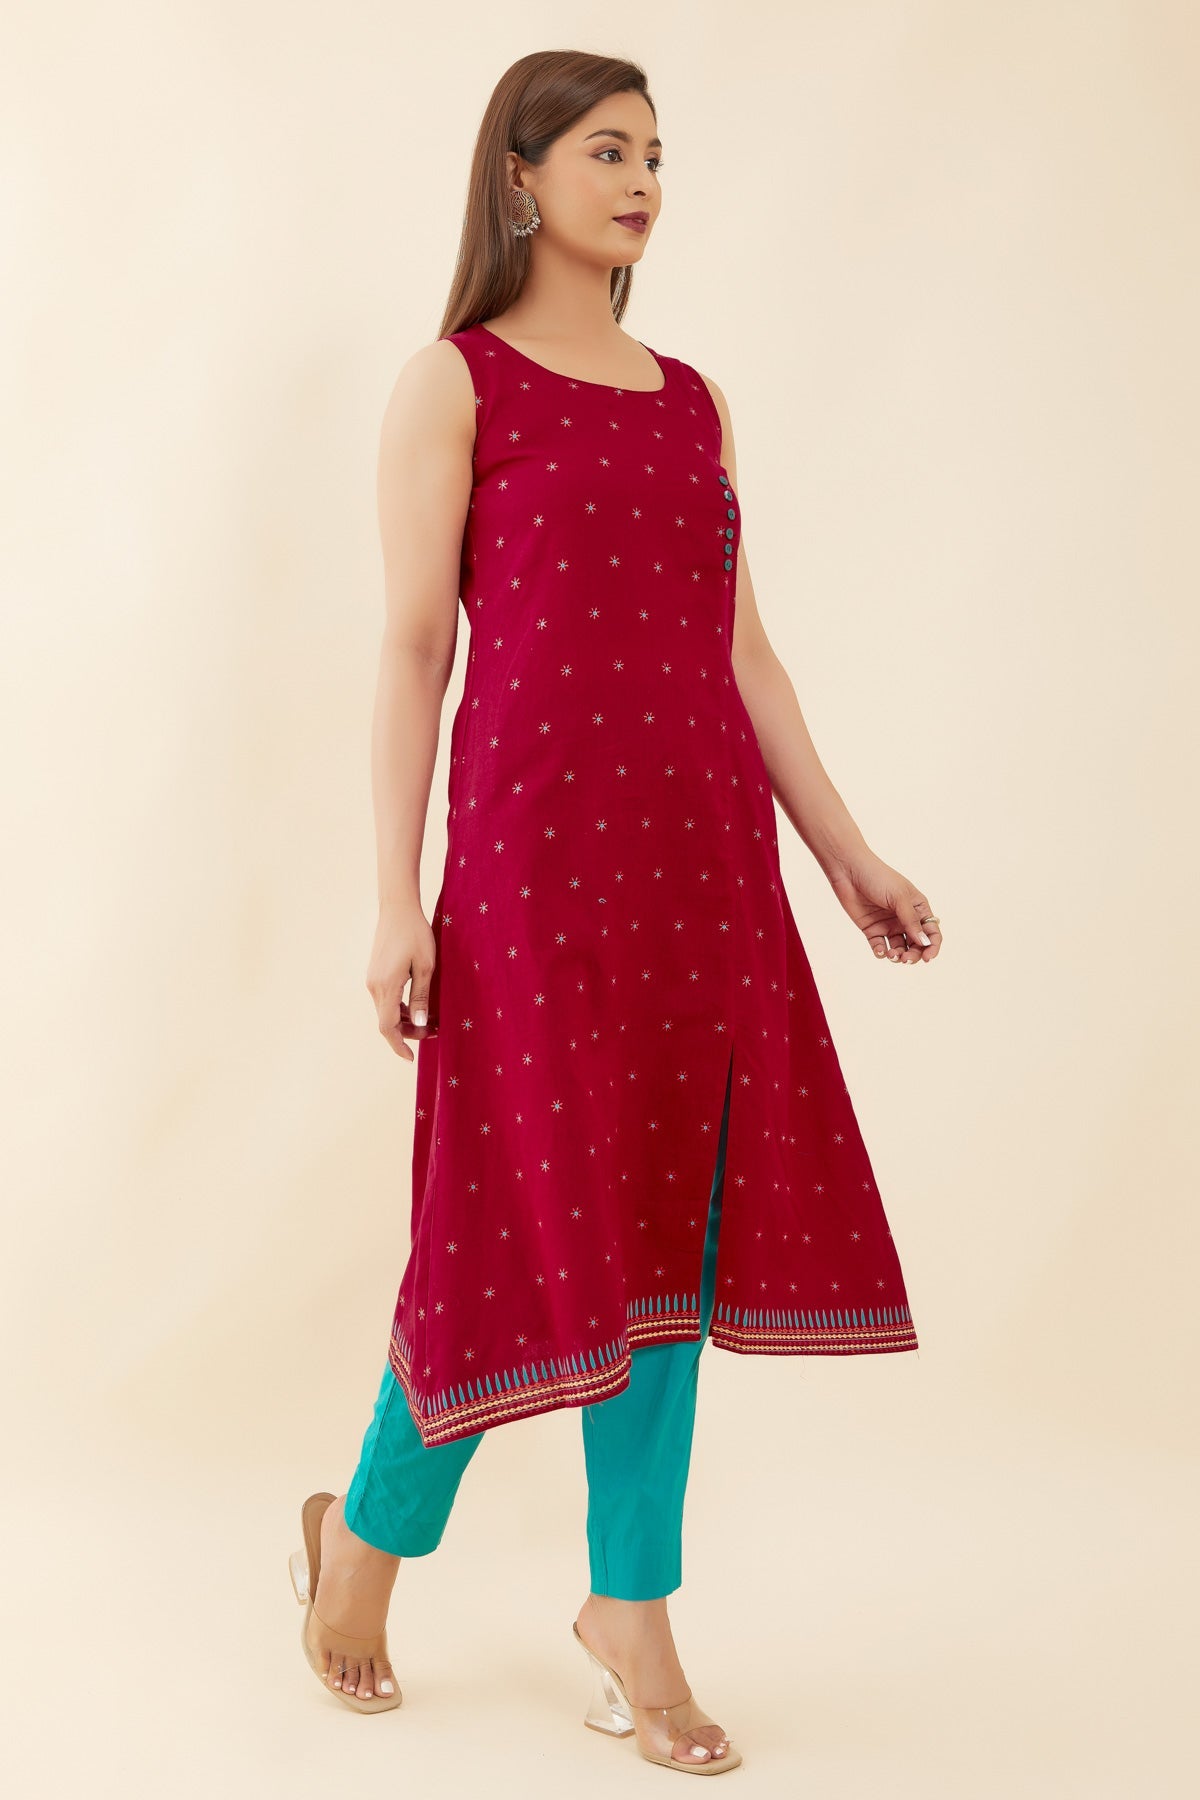 All Over Floral Sleeveless With Side Slit A-Line Kurta - Pink